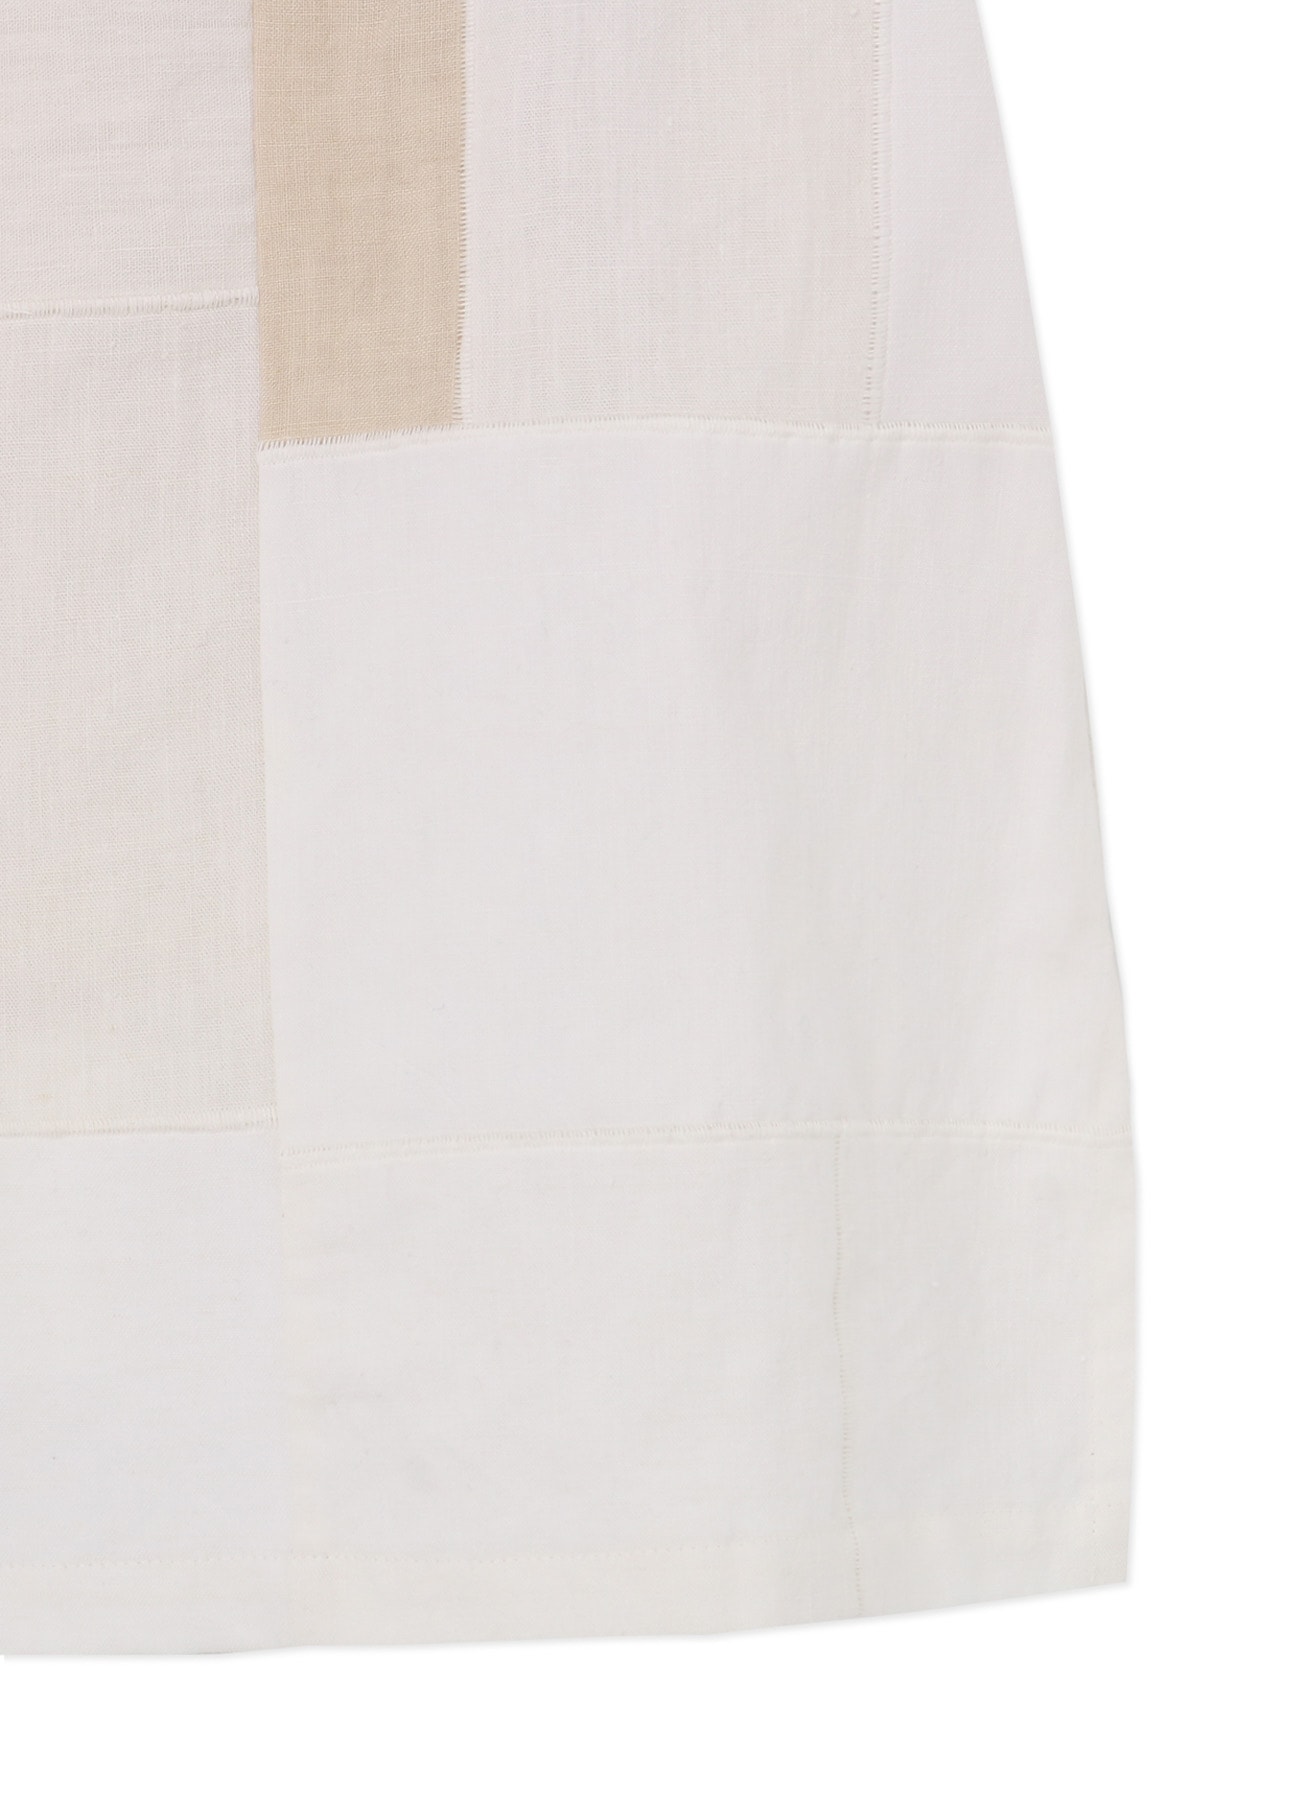 Y's KHADI COLLECTION]PATCHWORK SLEEVELESS DRESS(XS White): Vintage 